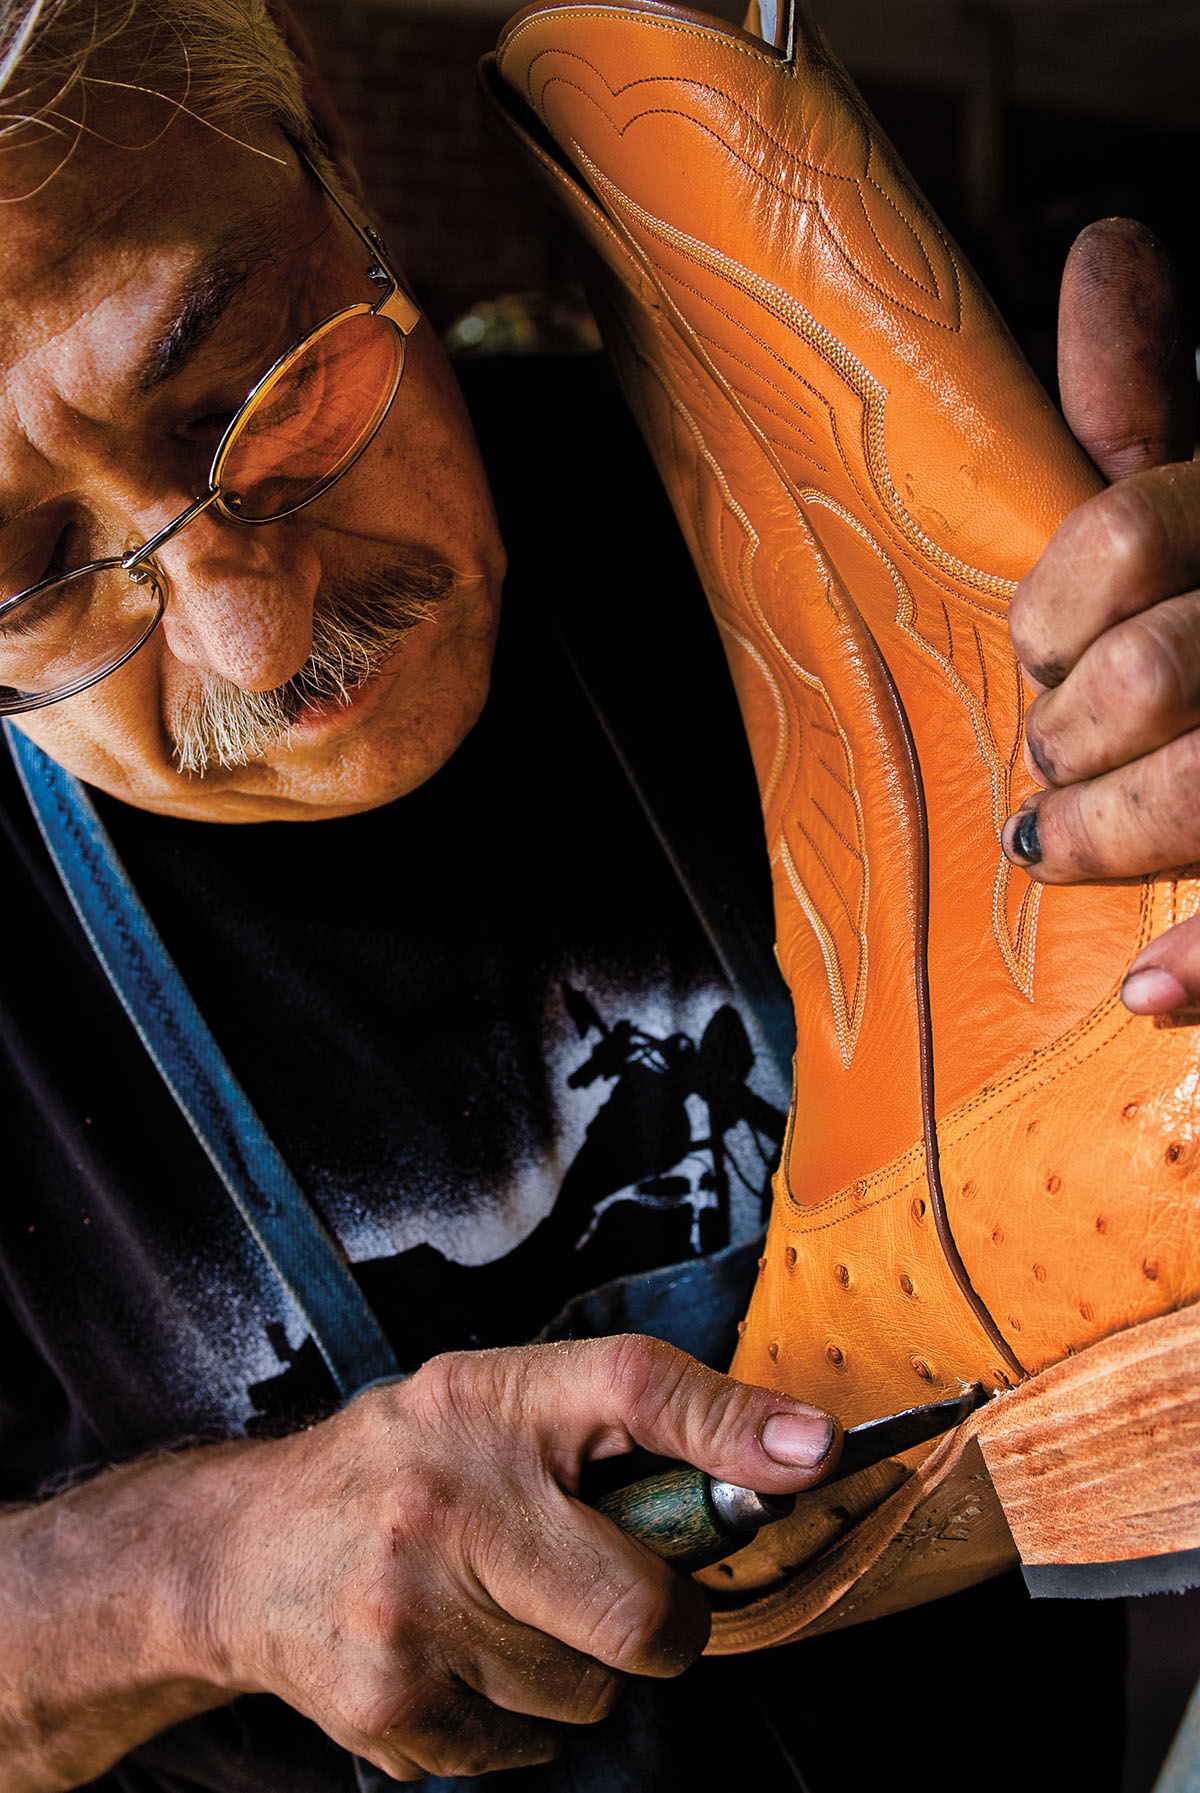 A man carefully works the leather on a pair of boots